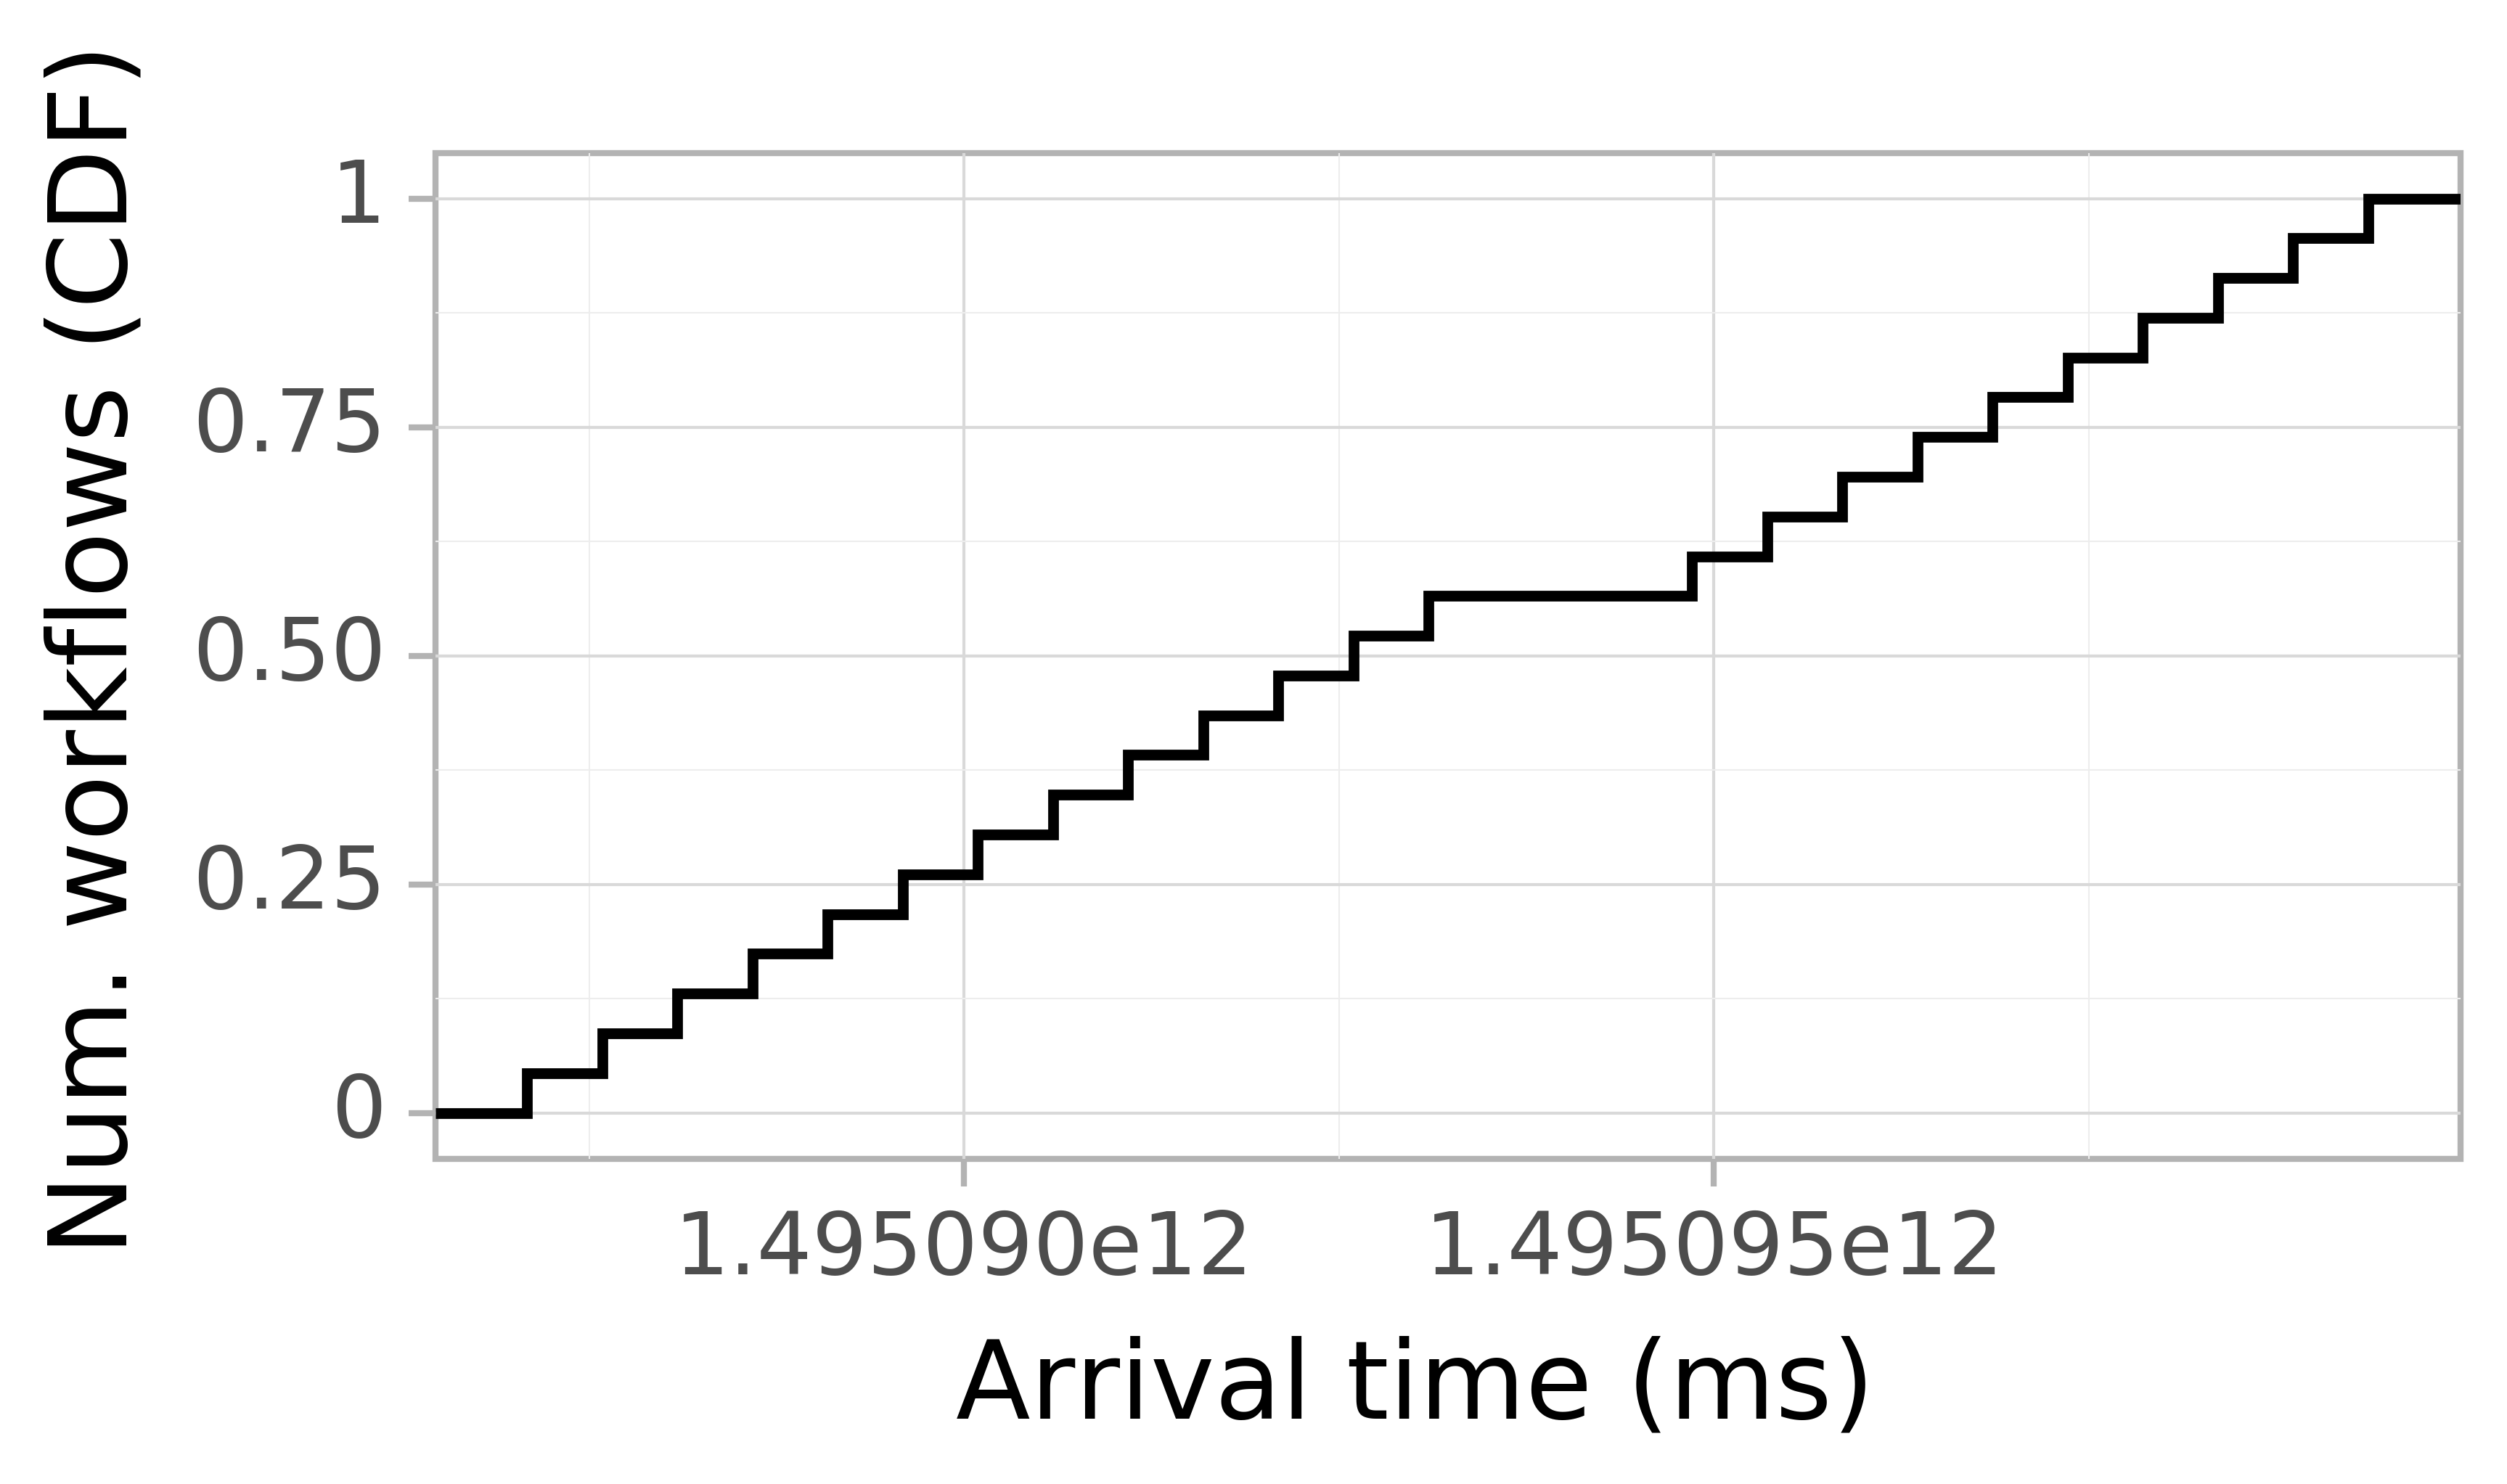 Job arrival CDF graph for the askalon-new_ee62 trace.